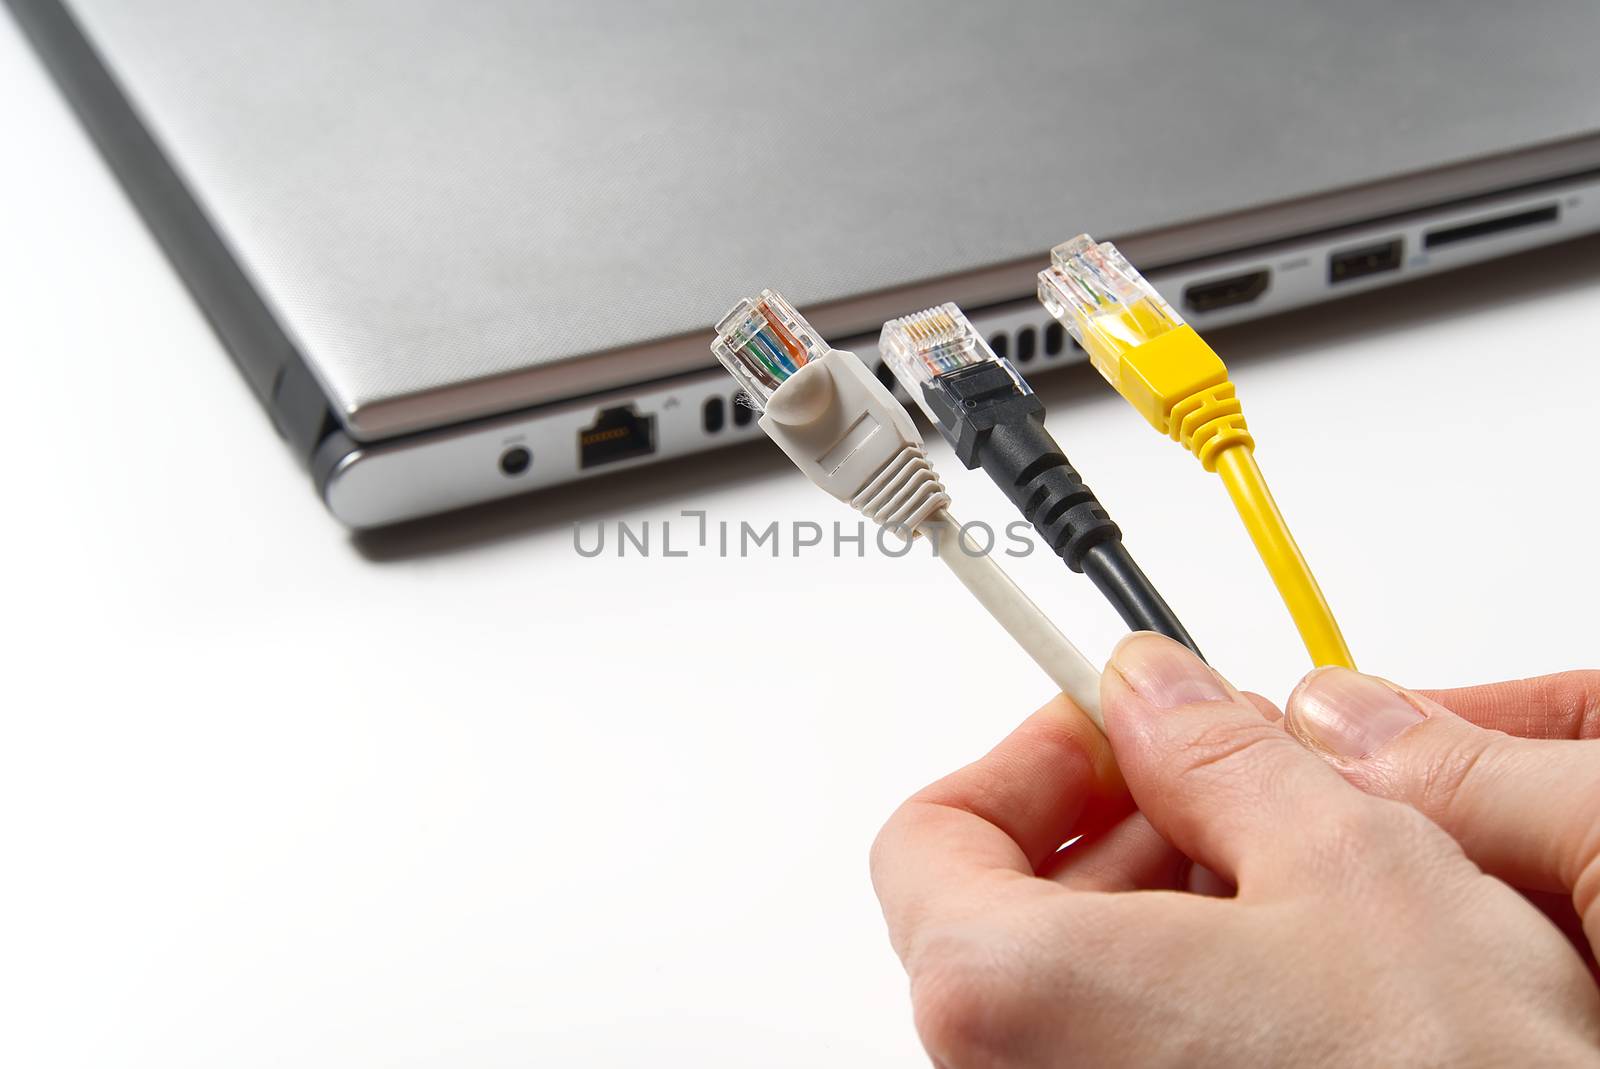 lan wires cat5 cat6. hand holds wires with high speed internet access. Internet technologies of the future. connect to the Internet every home to work from home. by PhotoTime